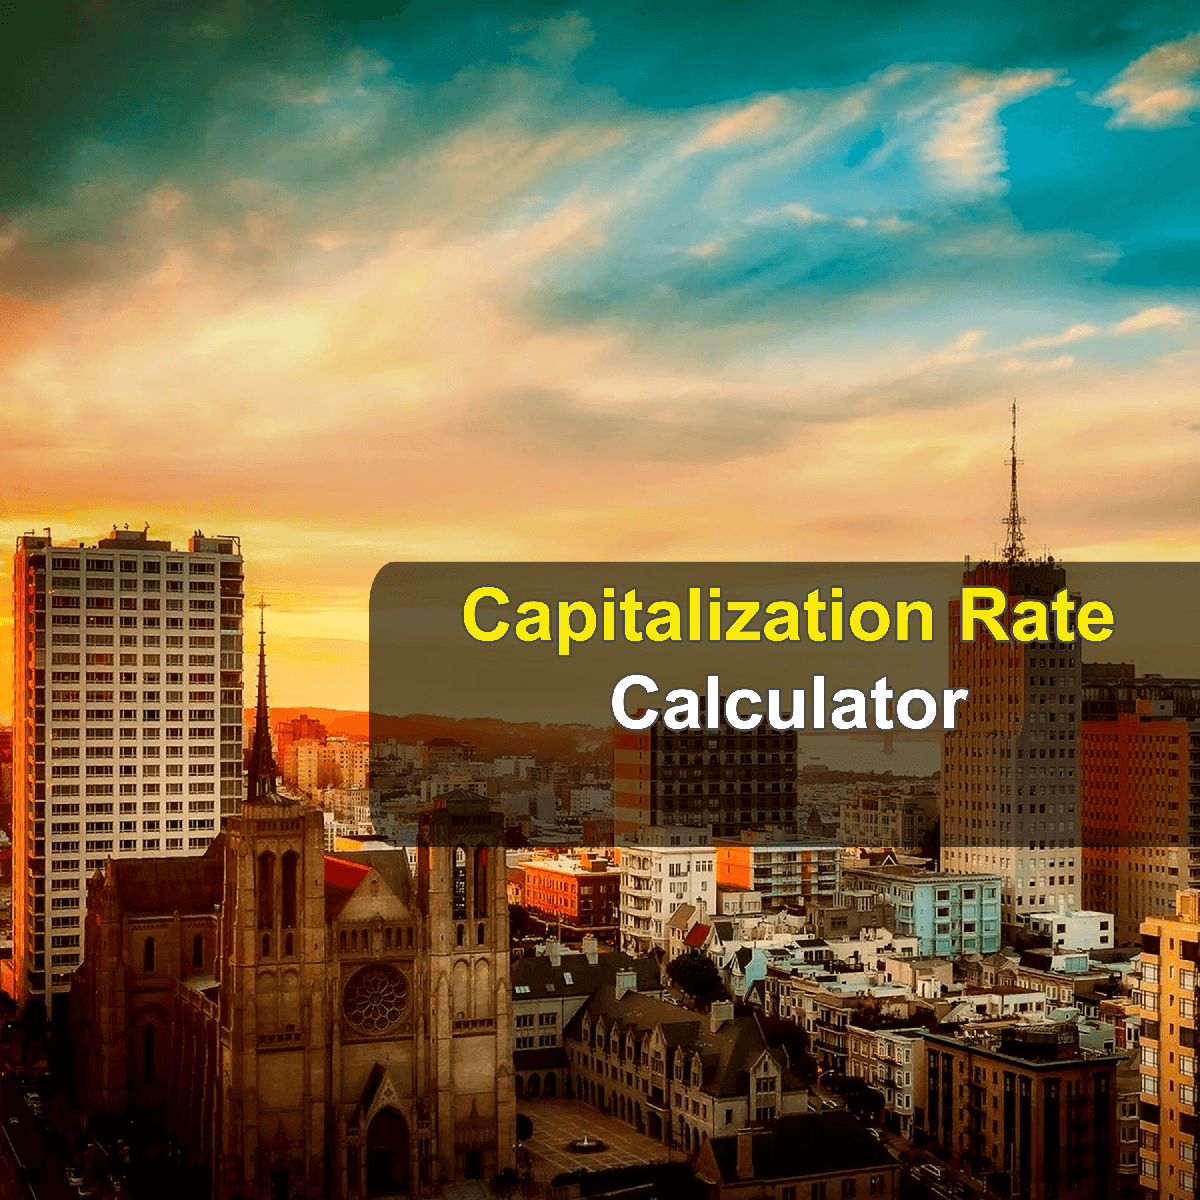 Capitalization Rate Calculator. This image provides details of how to calculate the capitalization rate using a calculator and notepad. By using the cap rate formula, the Cap Rate Calculator provides a true calculation of the profitability of real estate investments.